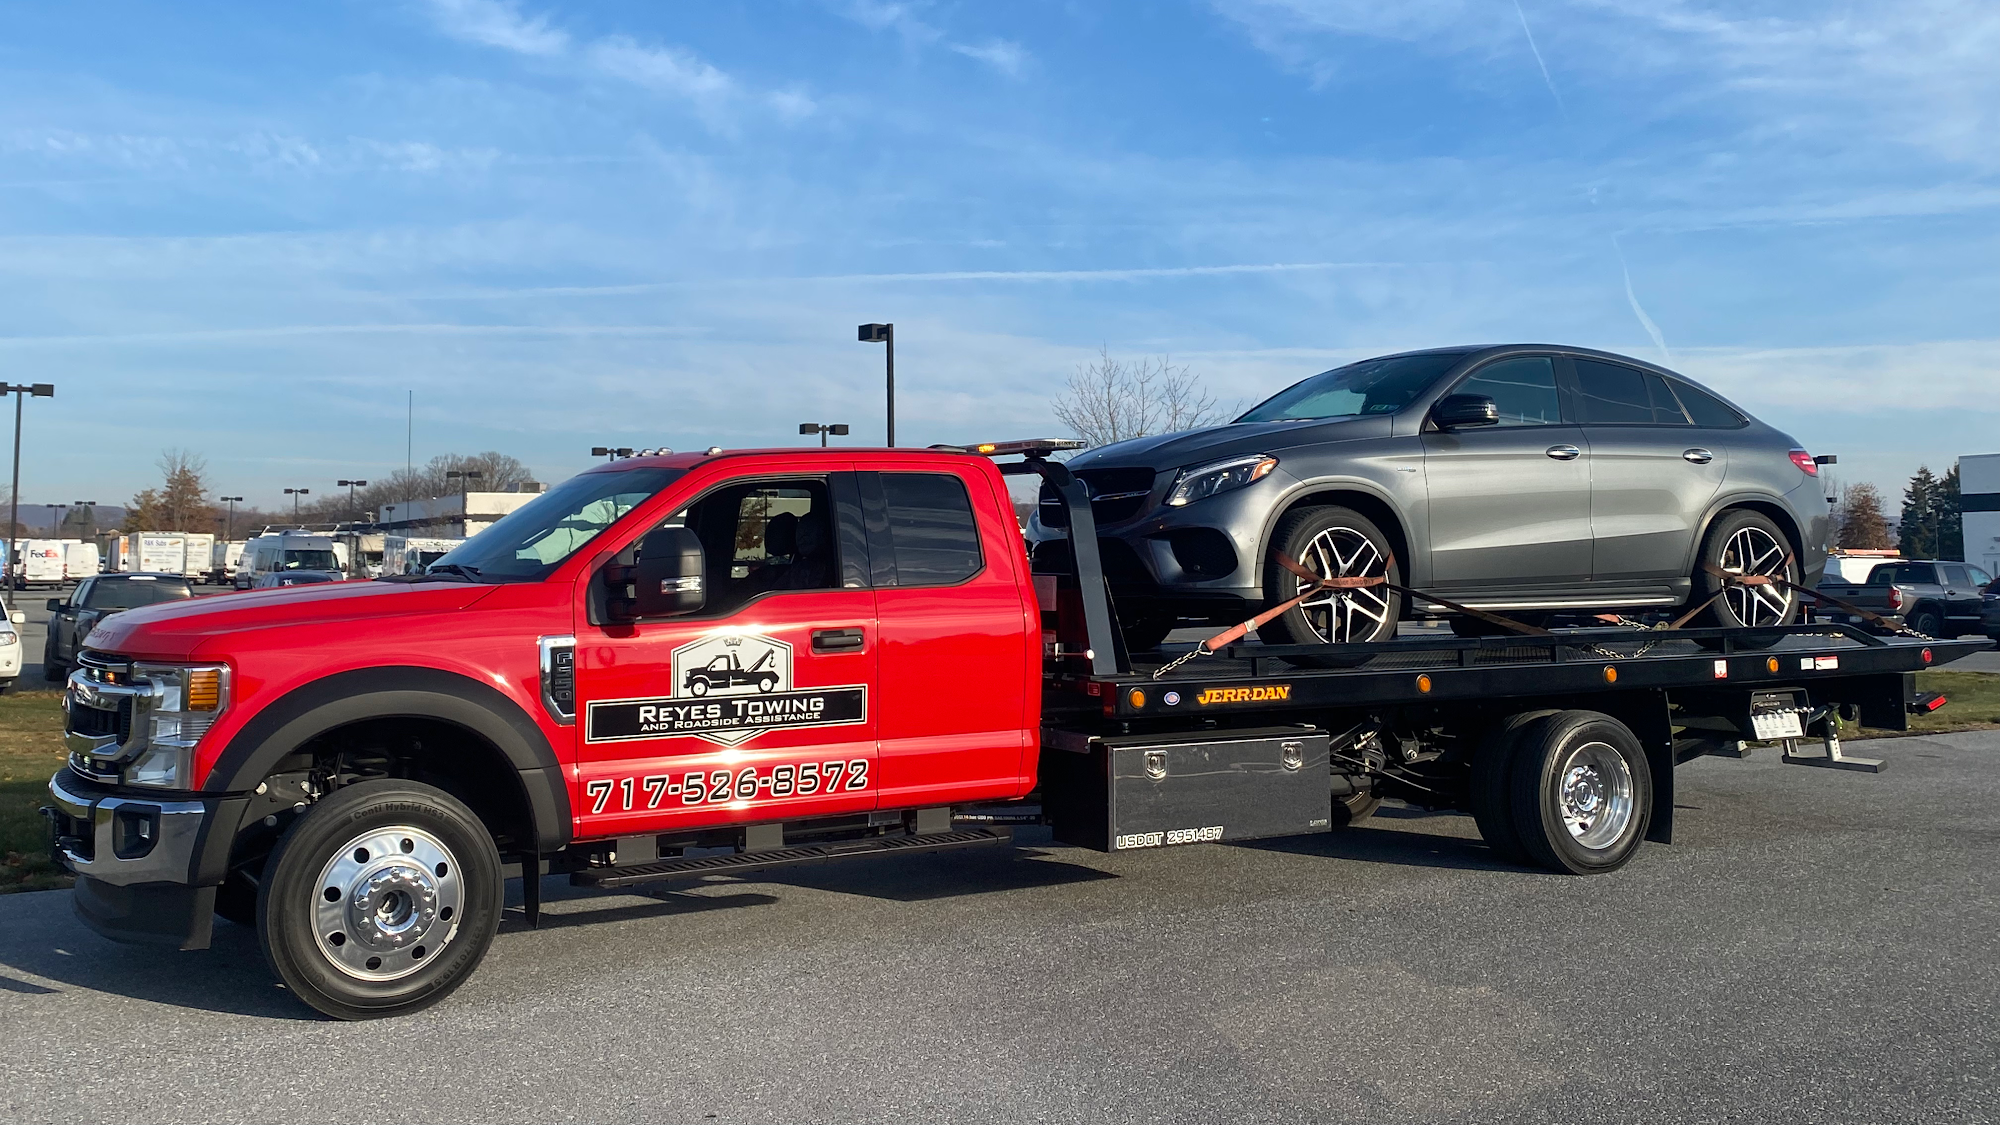 Reyes Towing and Roadside Assistance, LLC